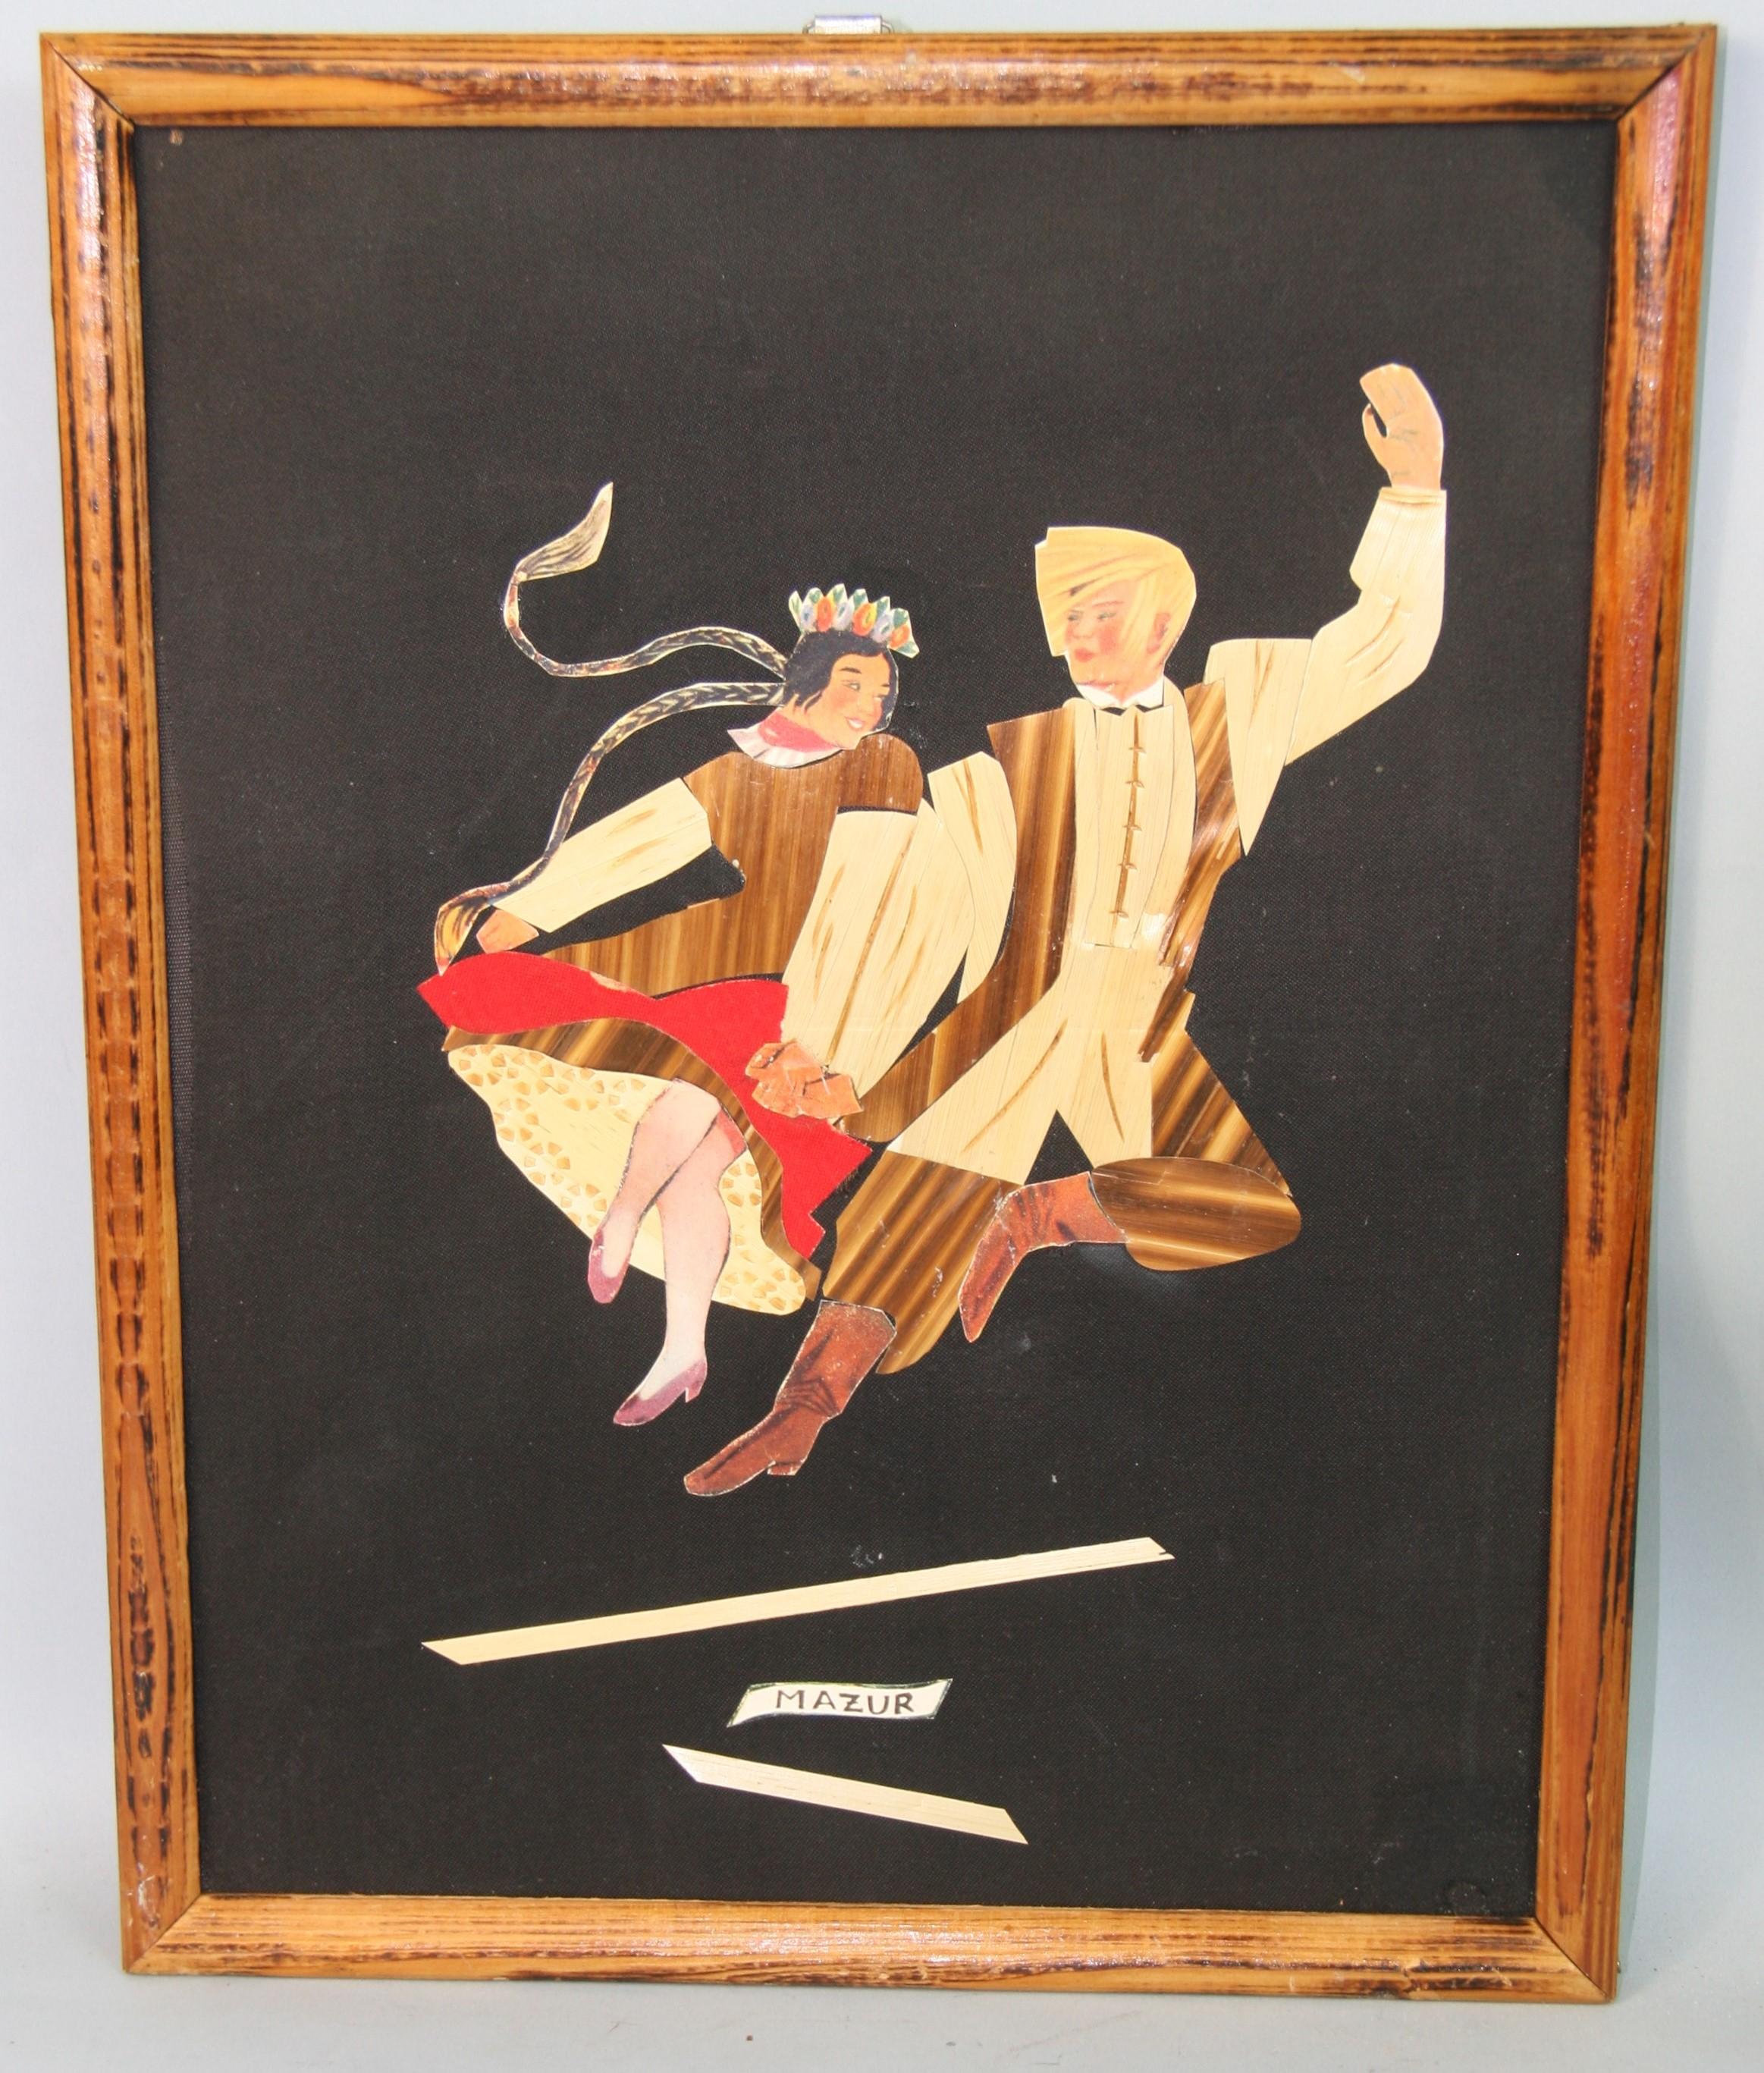 Vintage Polish Collage Dance "The Mazur Folk Dancers" - Mixed Media Art by Unknown